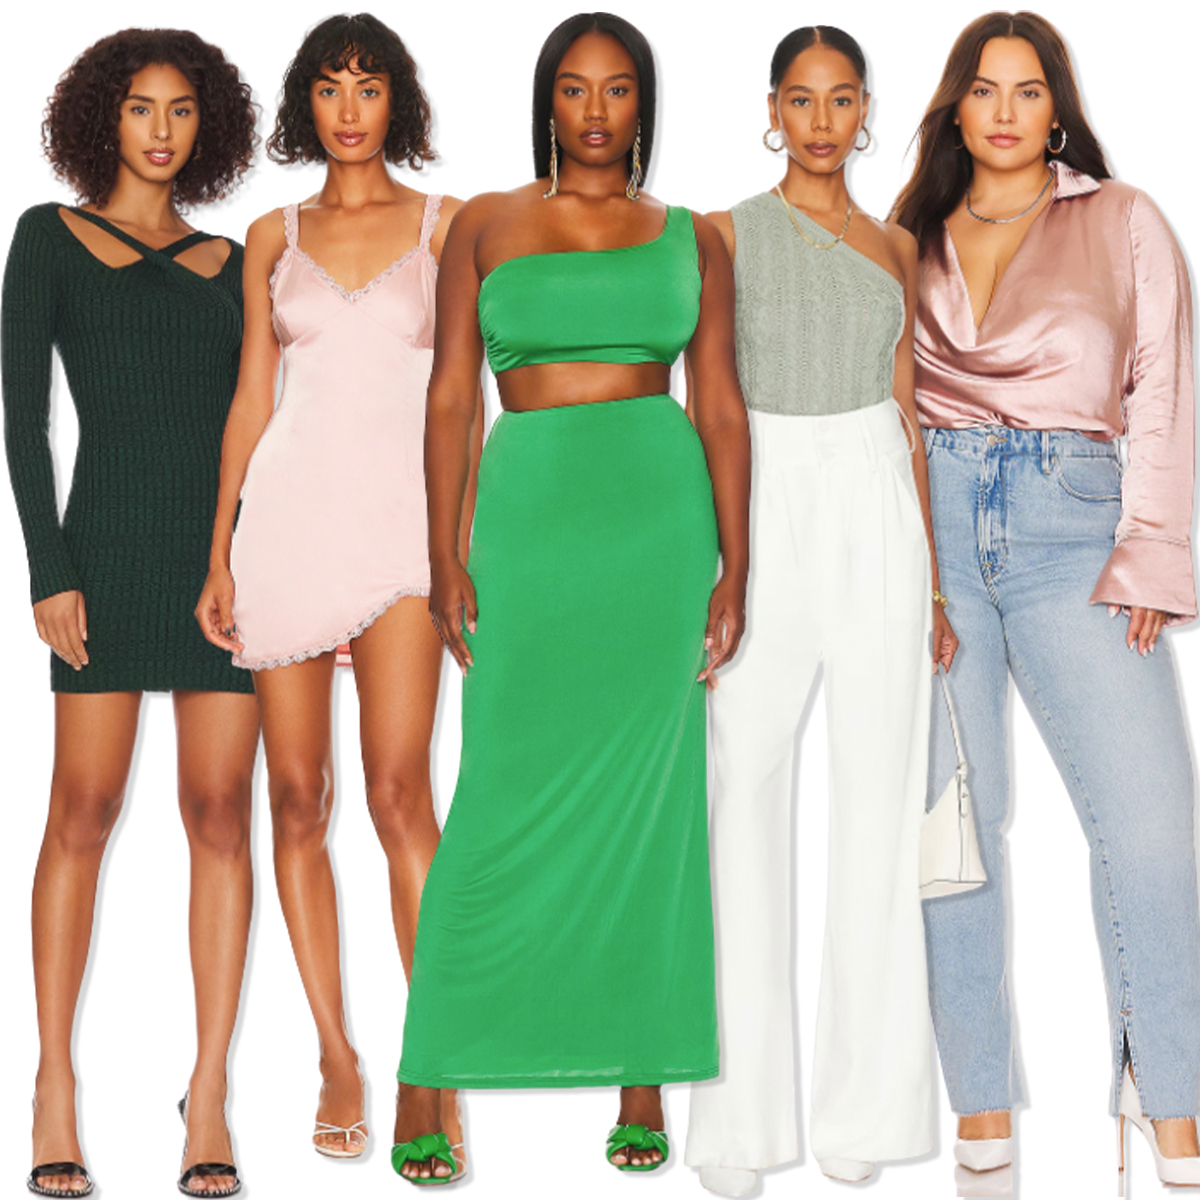 Revolve's Epic 65% Off Sale Has $212 Dresses for $34, $15 Tops & More